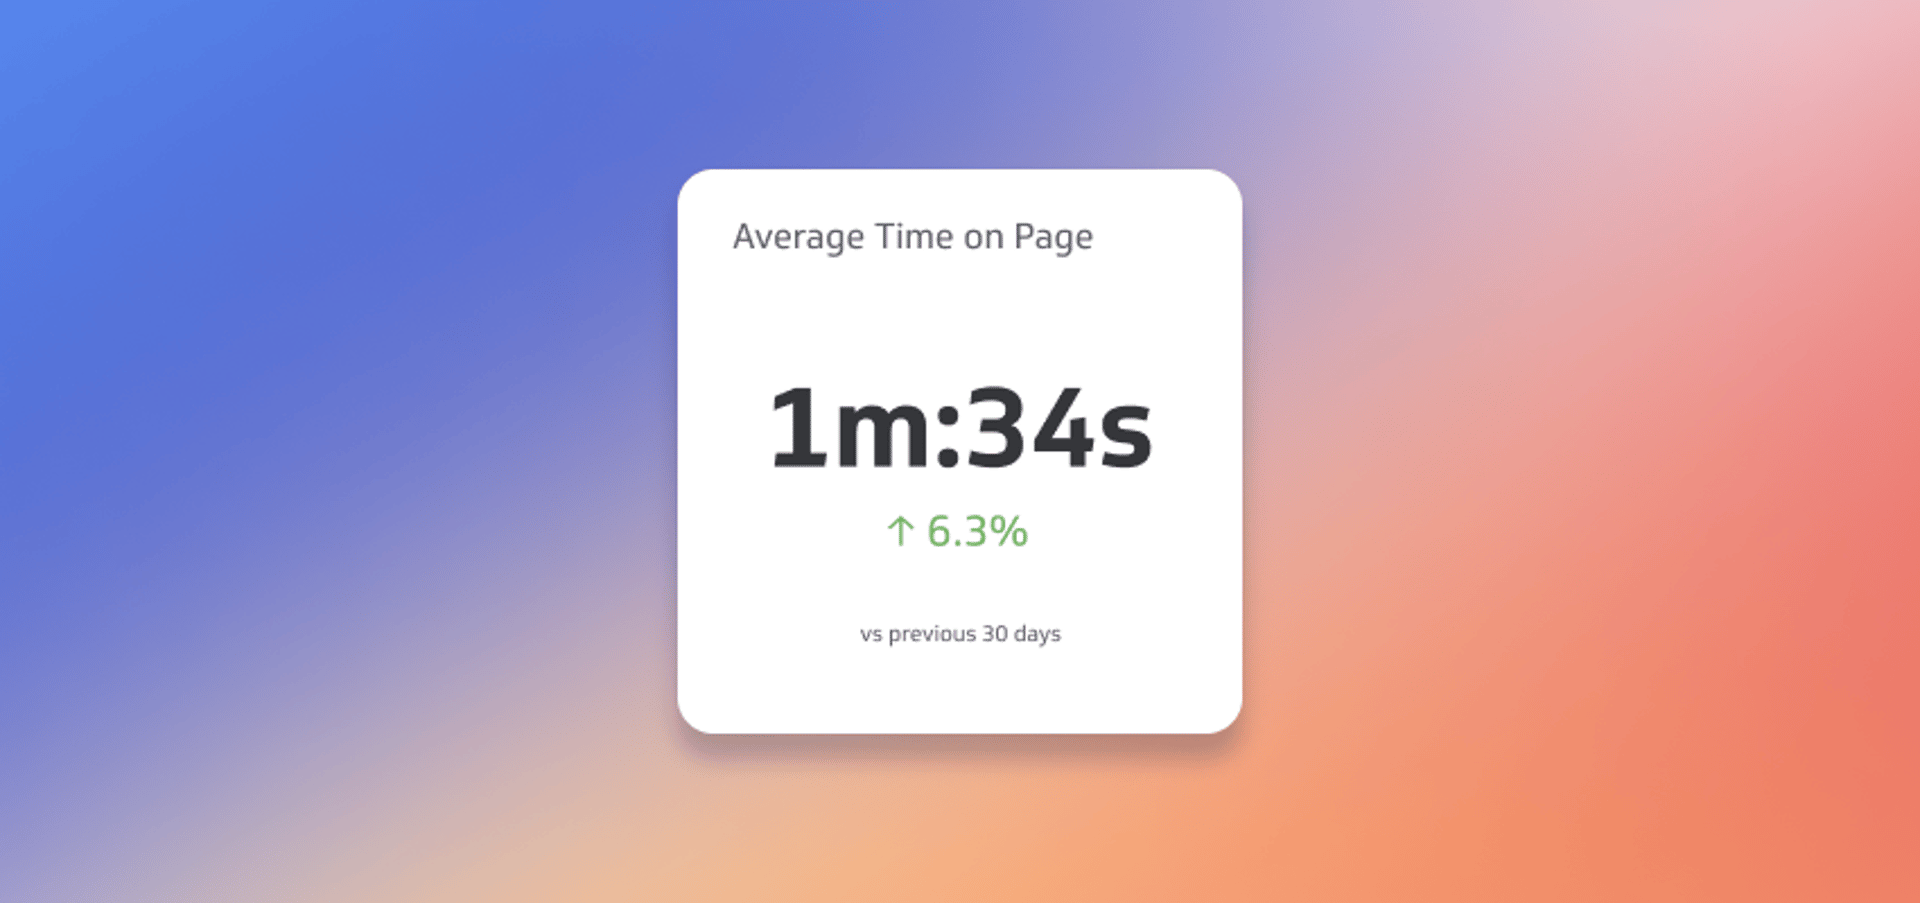 Top Marketing Kp Is Average Time on Page